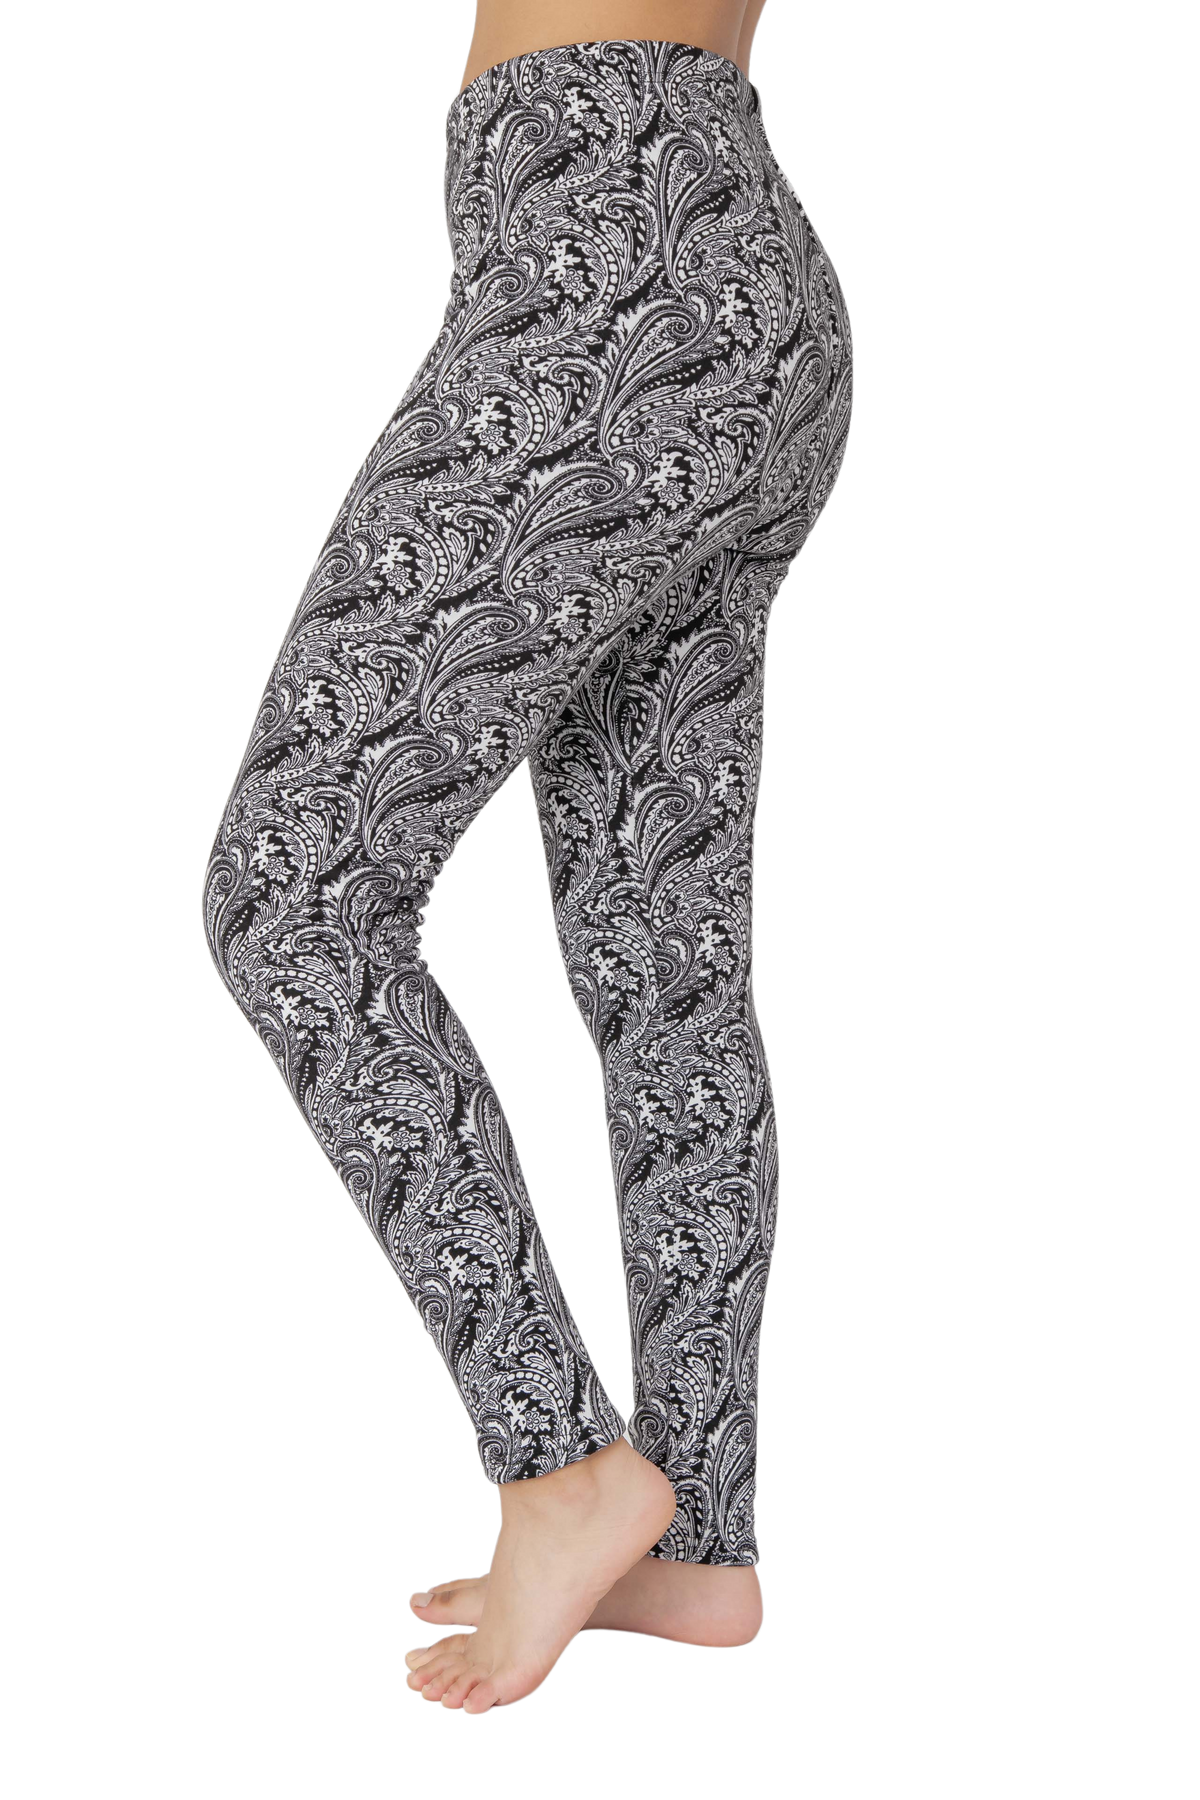 Womens Seamless Print Winter Thermal Leggings Women Thick Velvet Wool  Cashmere Pants Trousers For Sexy Look 40# From Mu02, $12.05